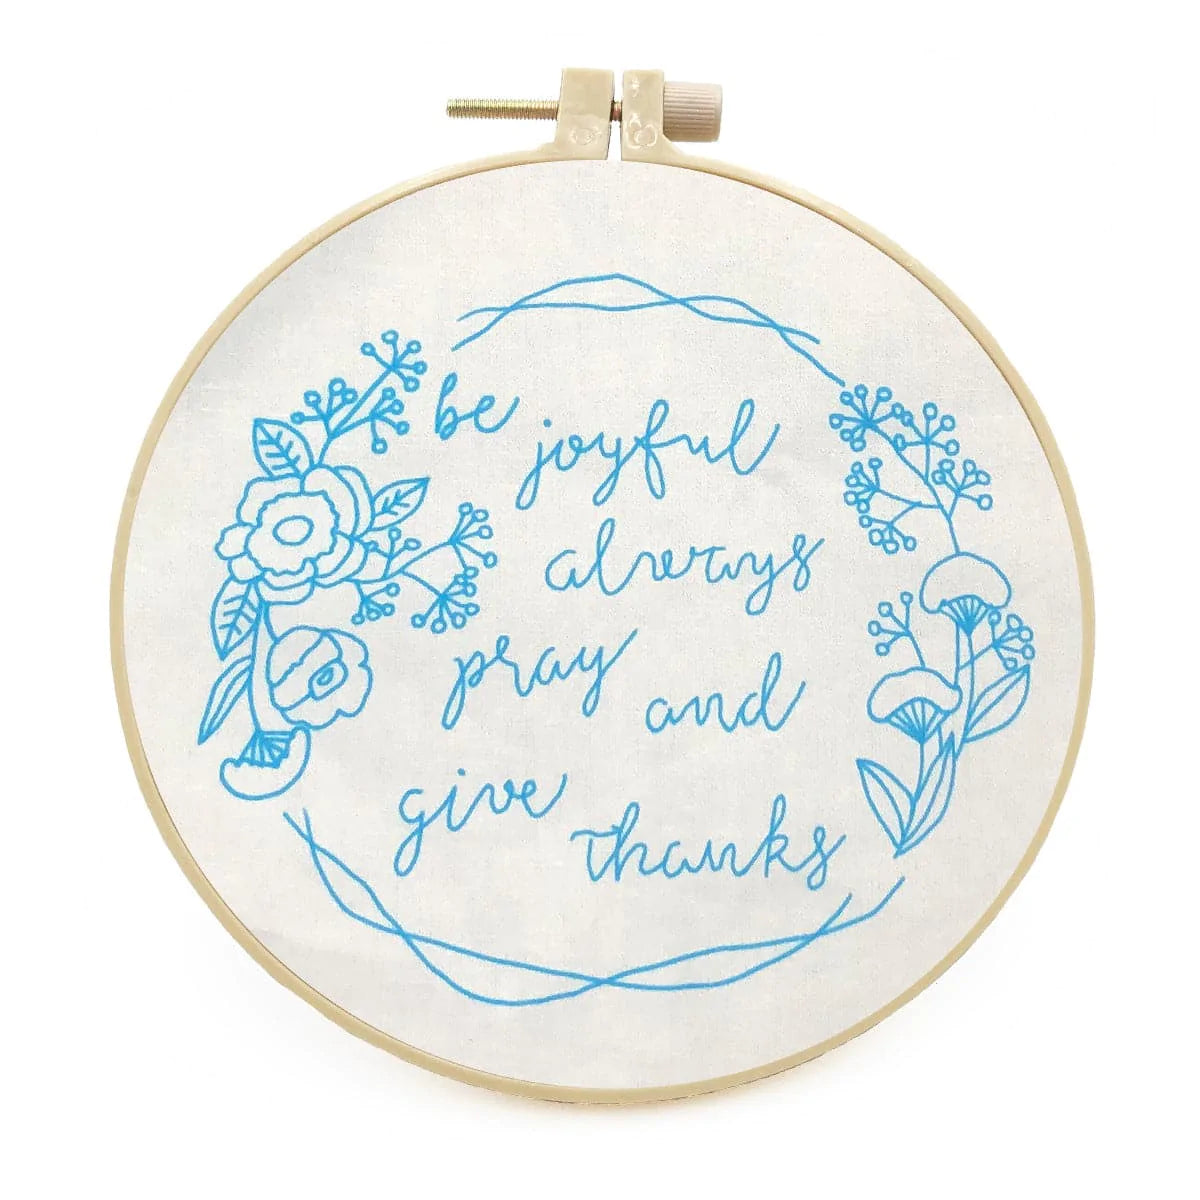 From the Portuguese artist-embroidery ktclubs.com